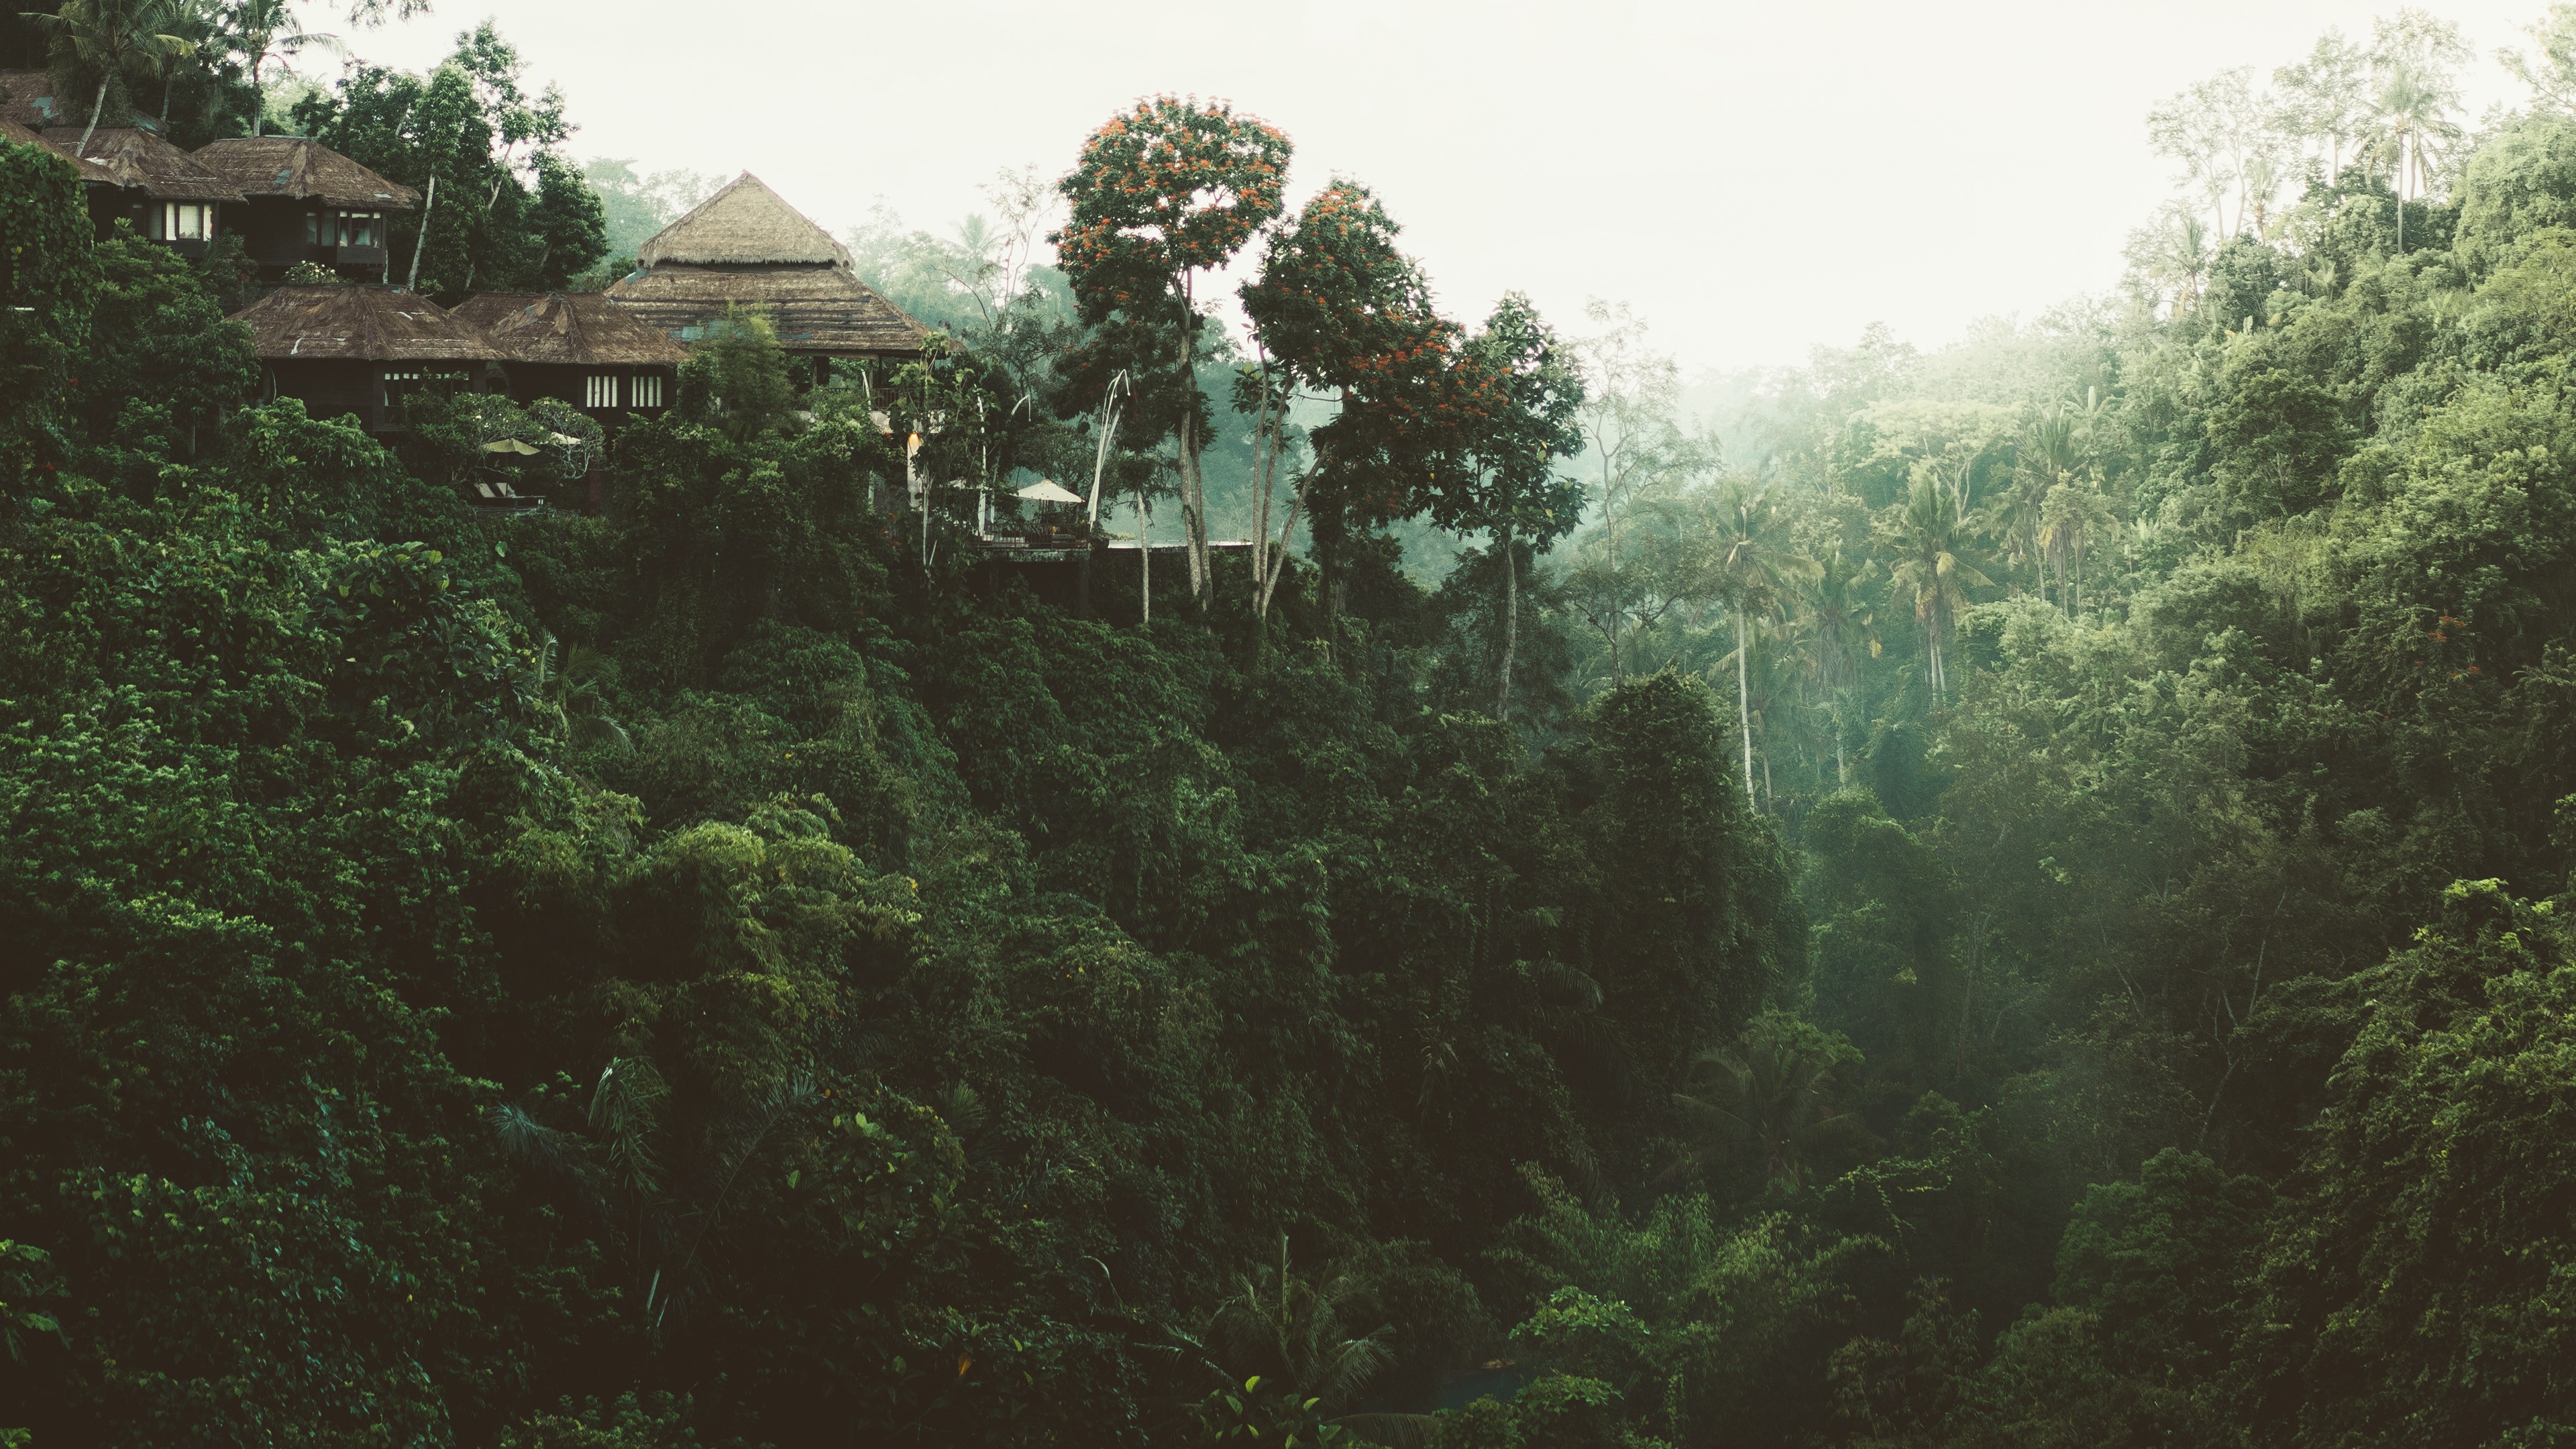 Wallpaper Jungle, trees, house 3840x2160 UHD 4K Picture, Image